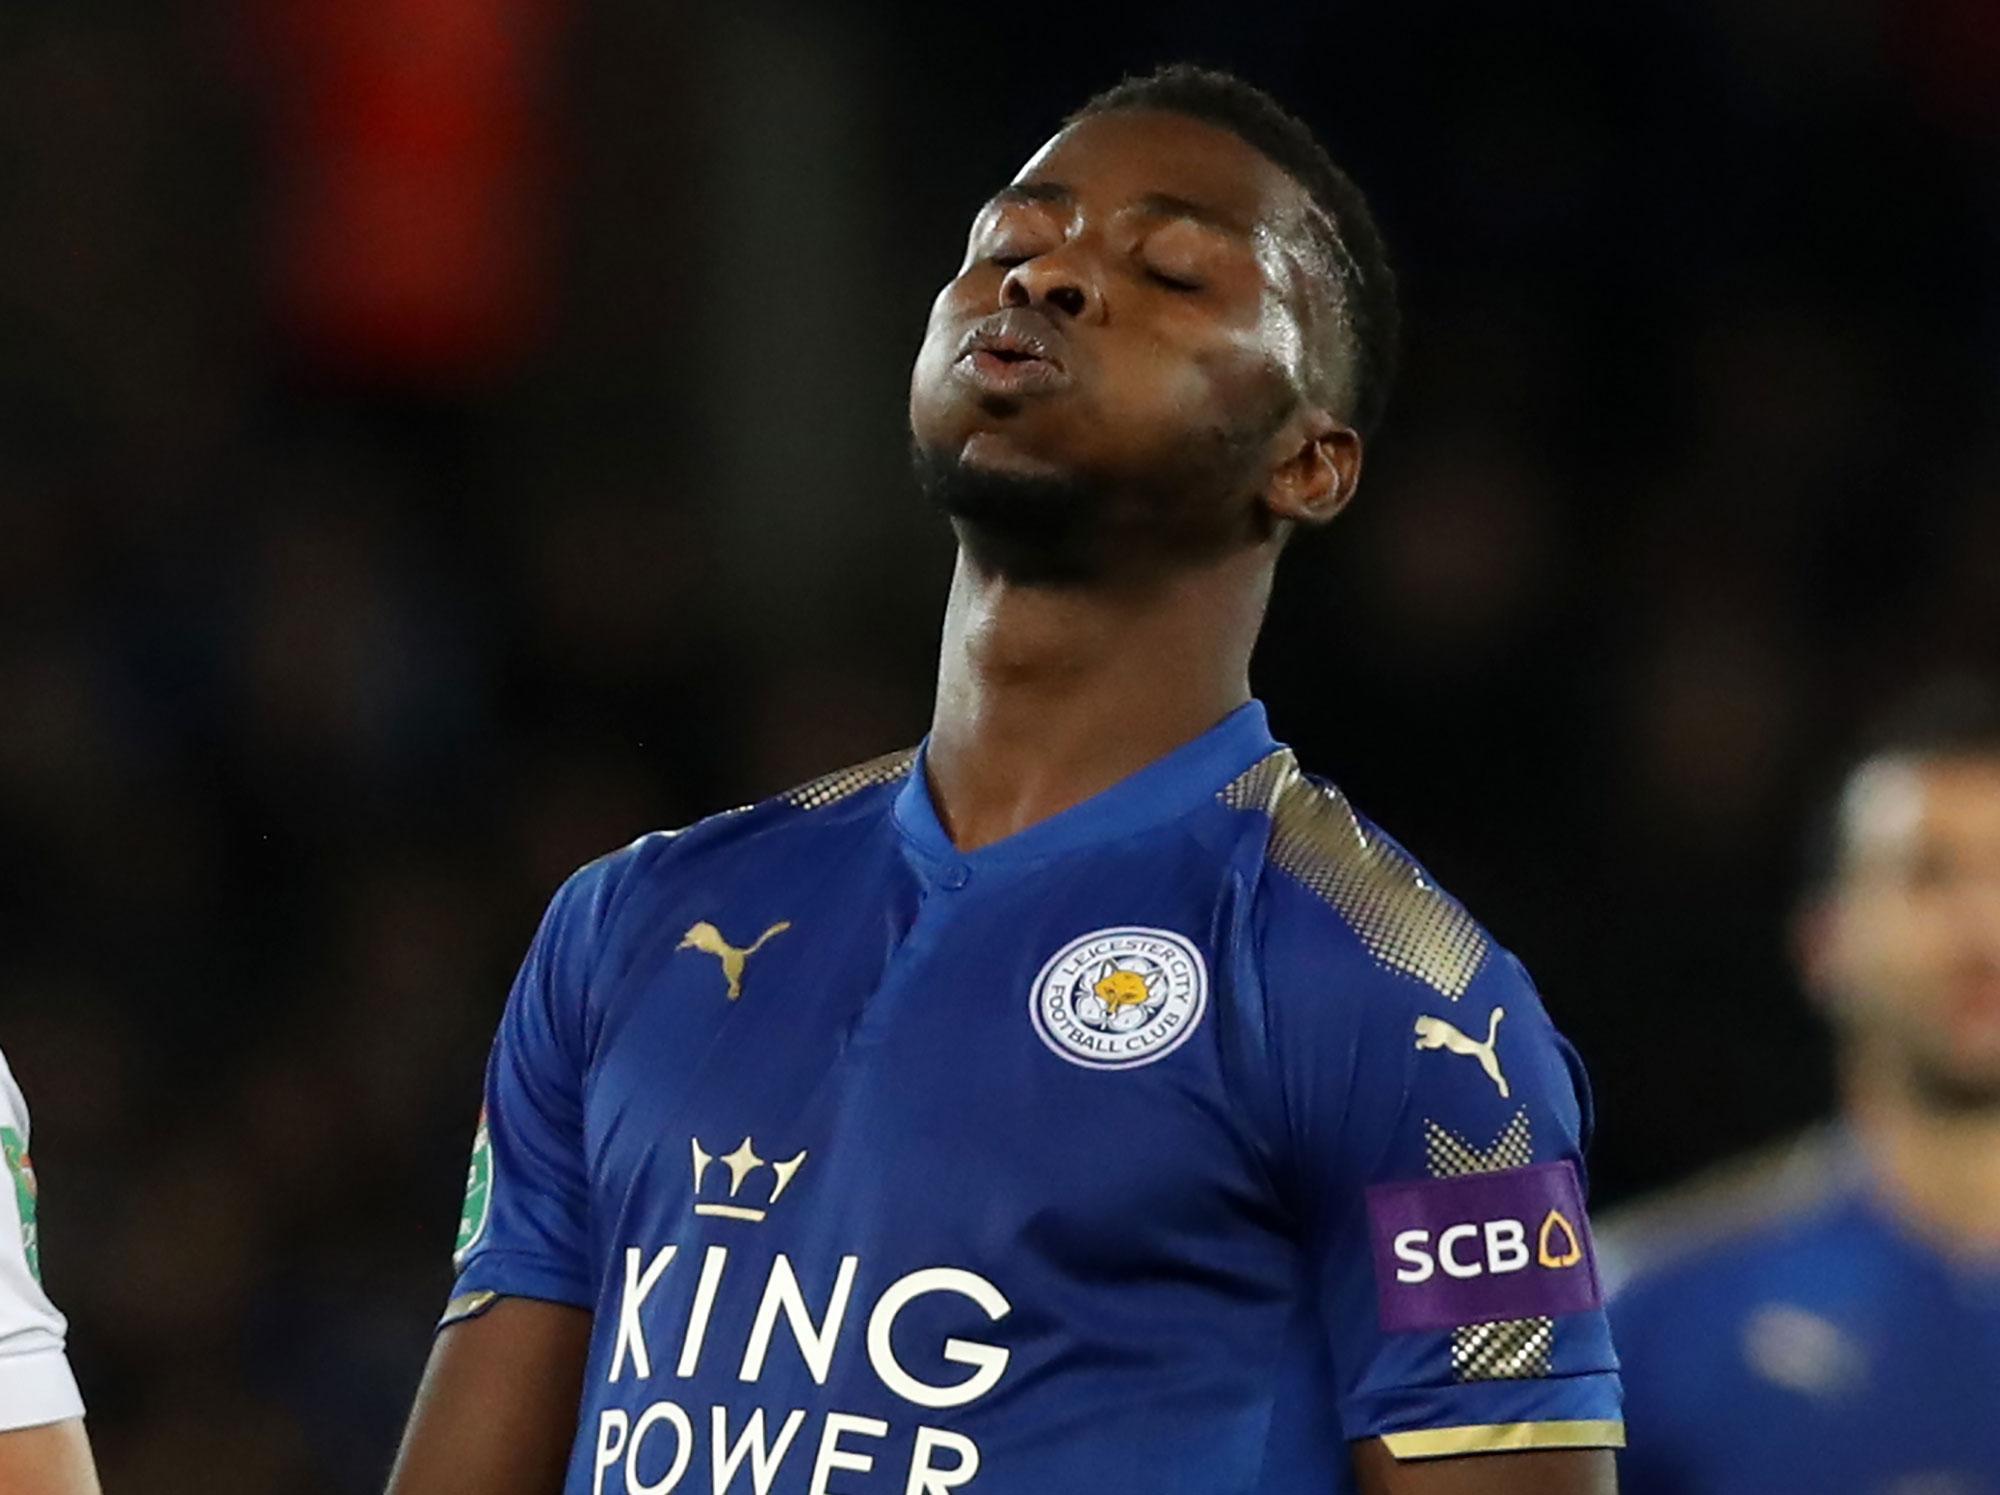 Kelechi Iheanacho has not enjoyed the best of seasons with Leicester